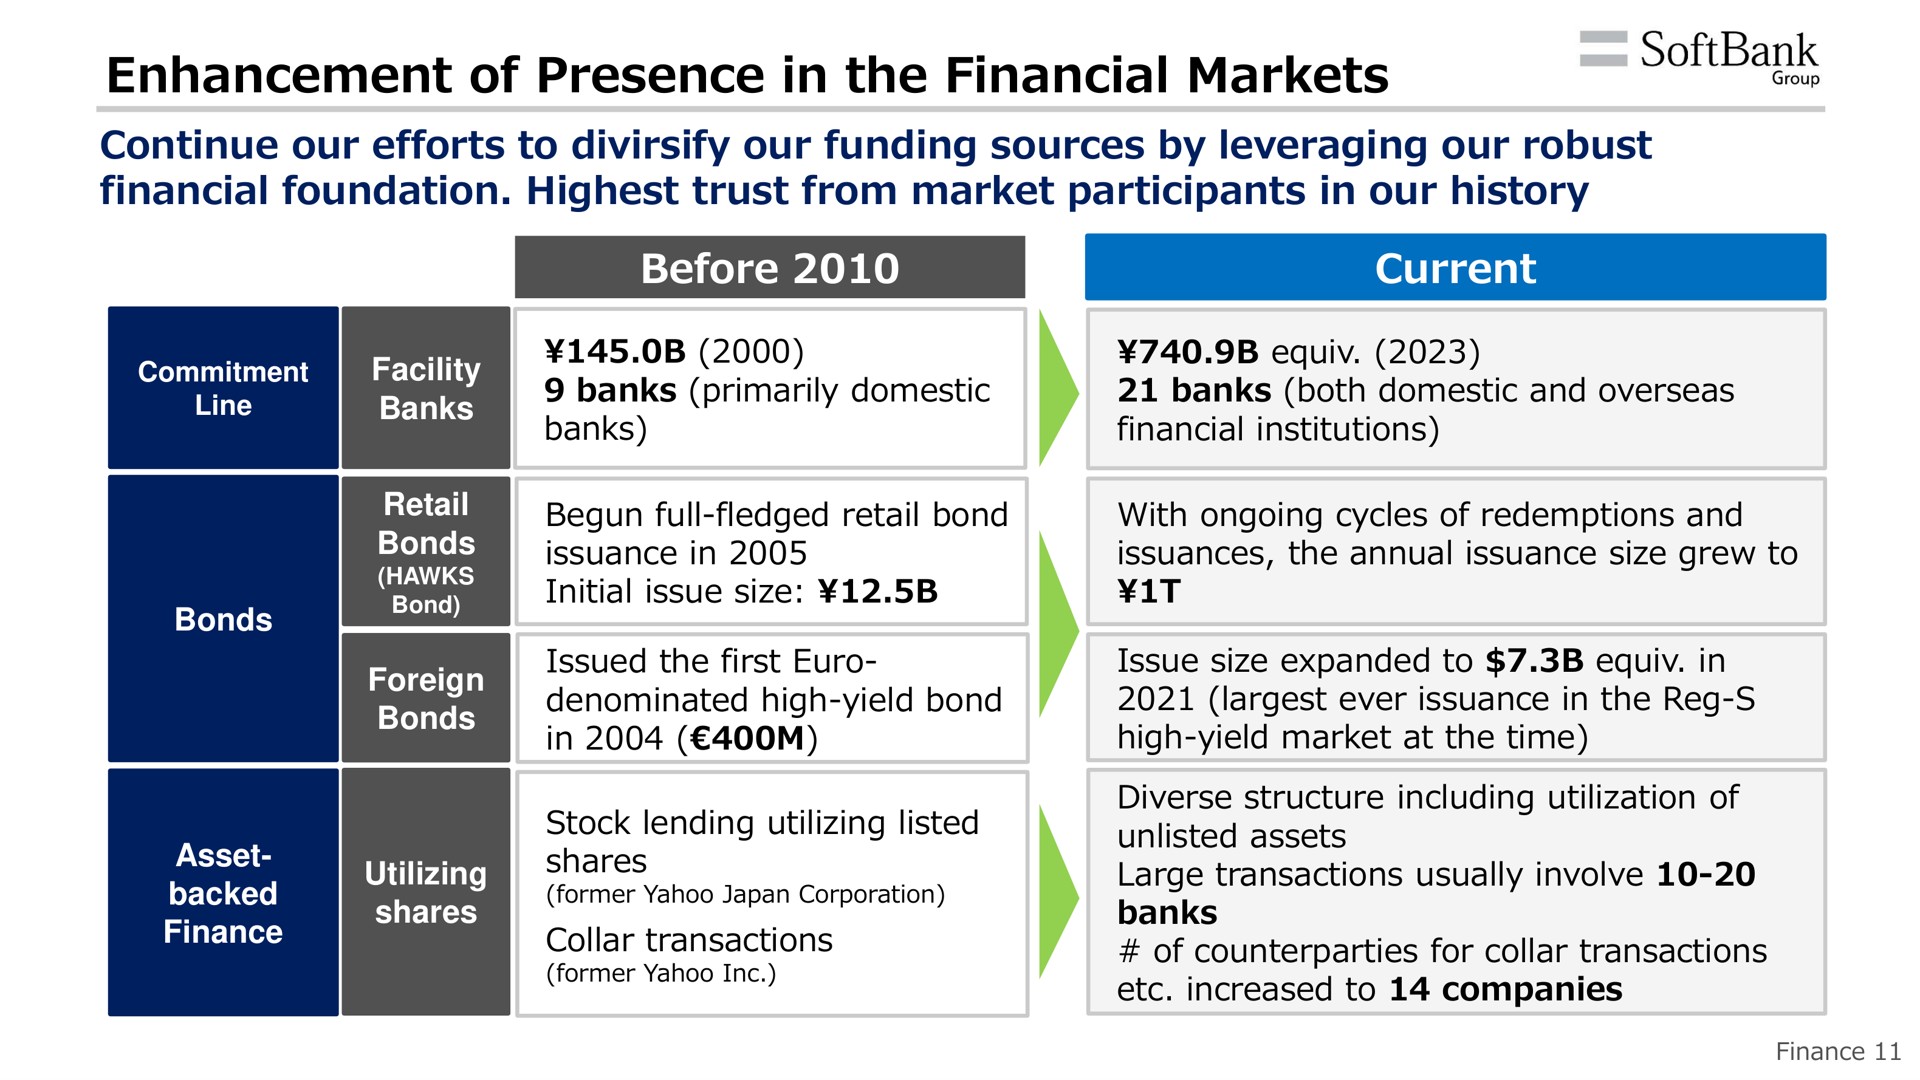 enhancement of presence in the financial markets see | SoftBank